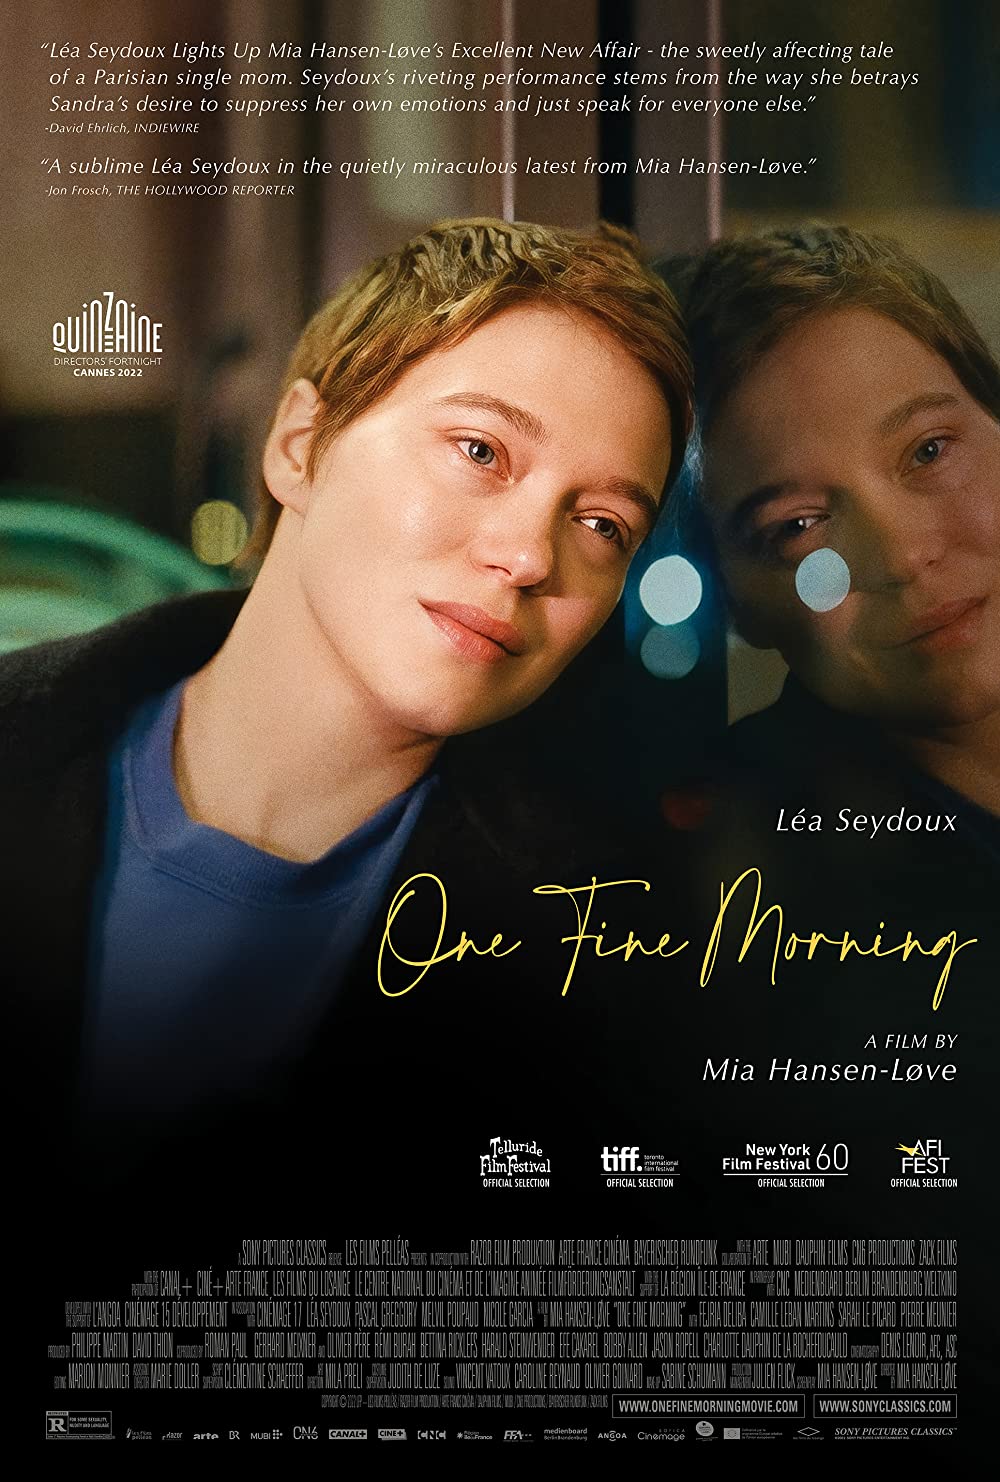 Movie poster of "one fine morning"